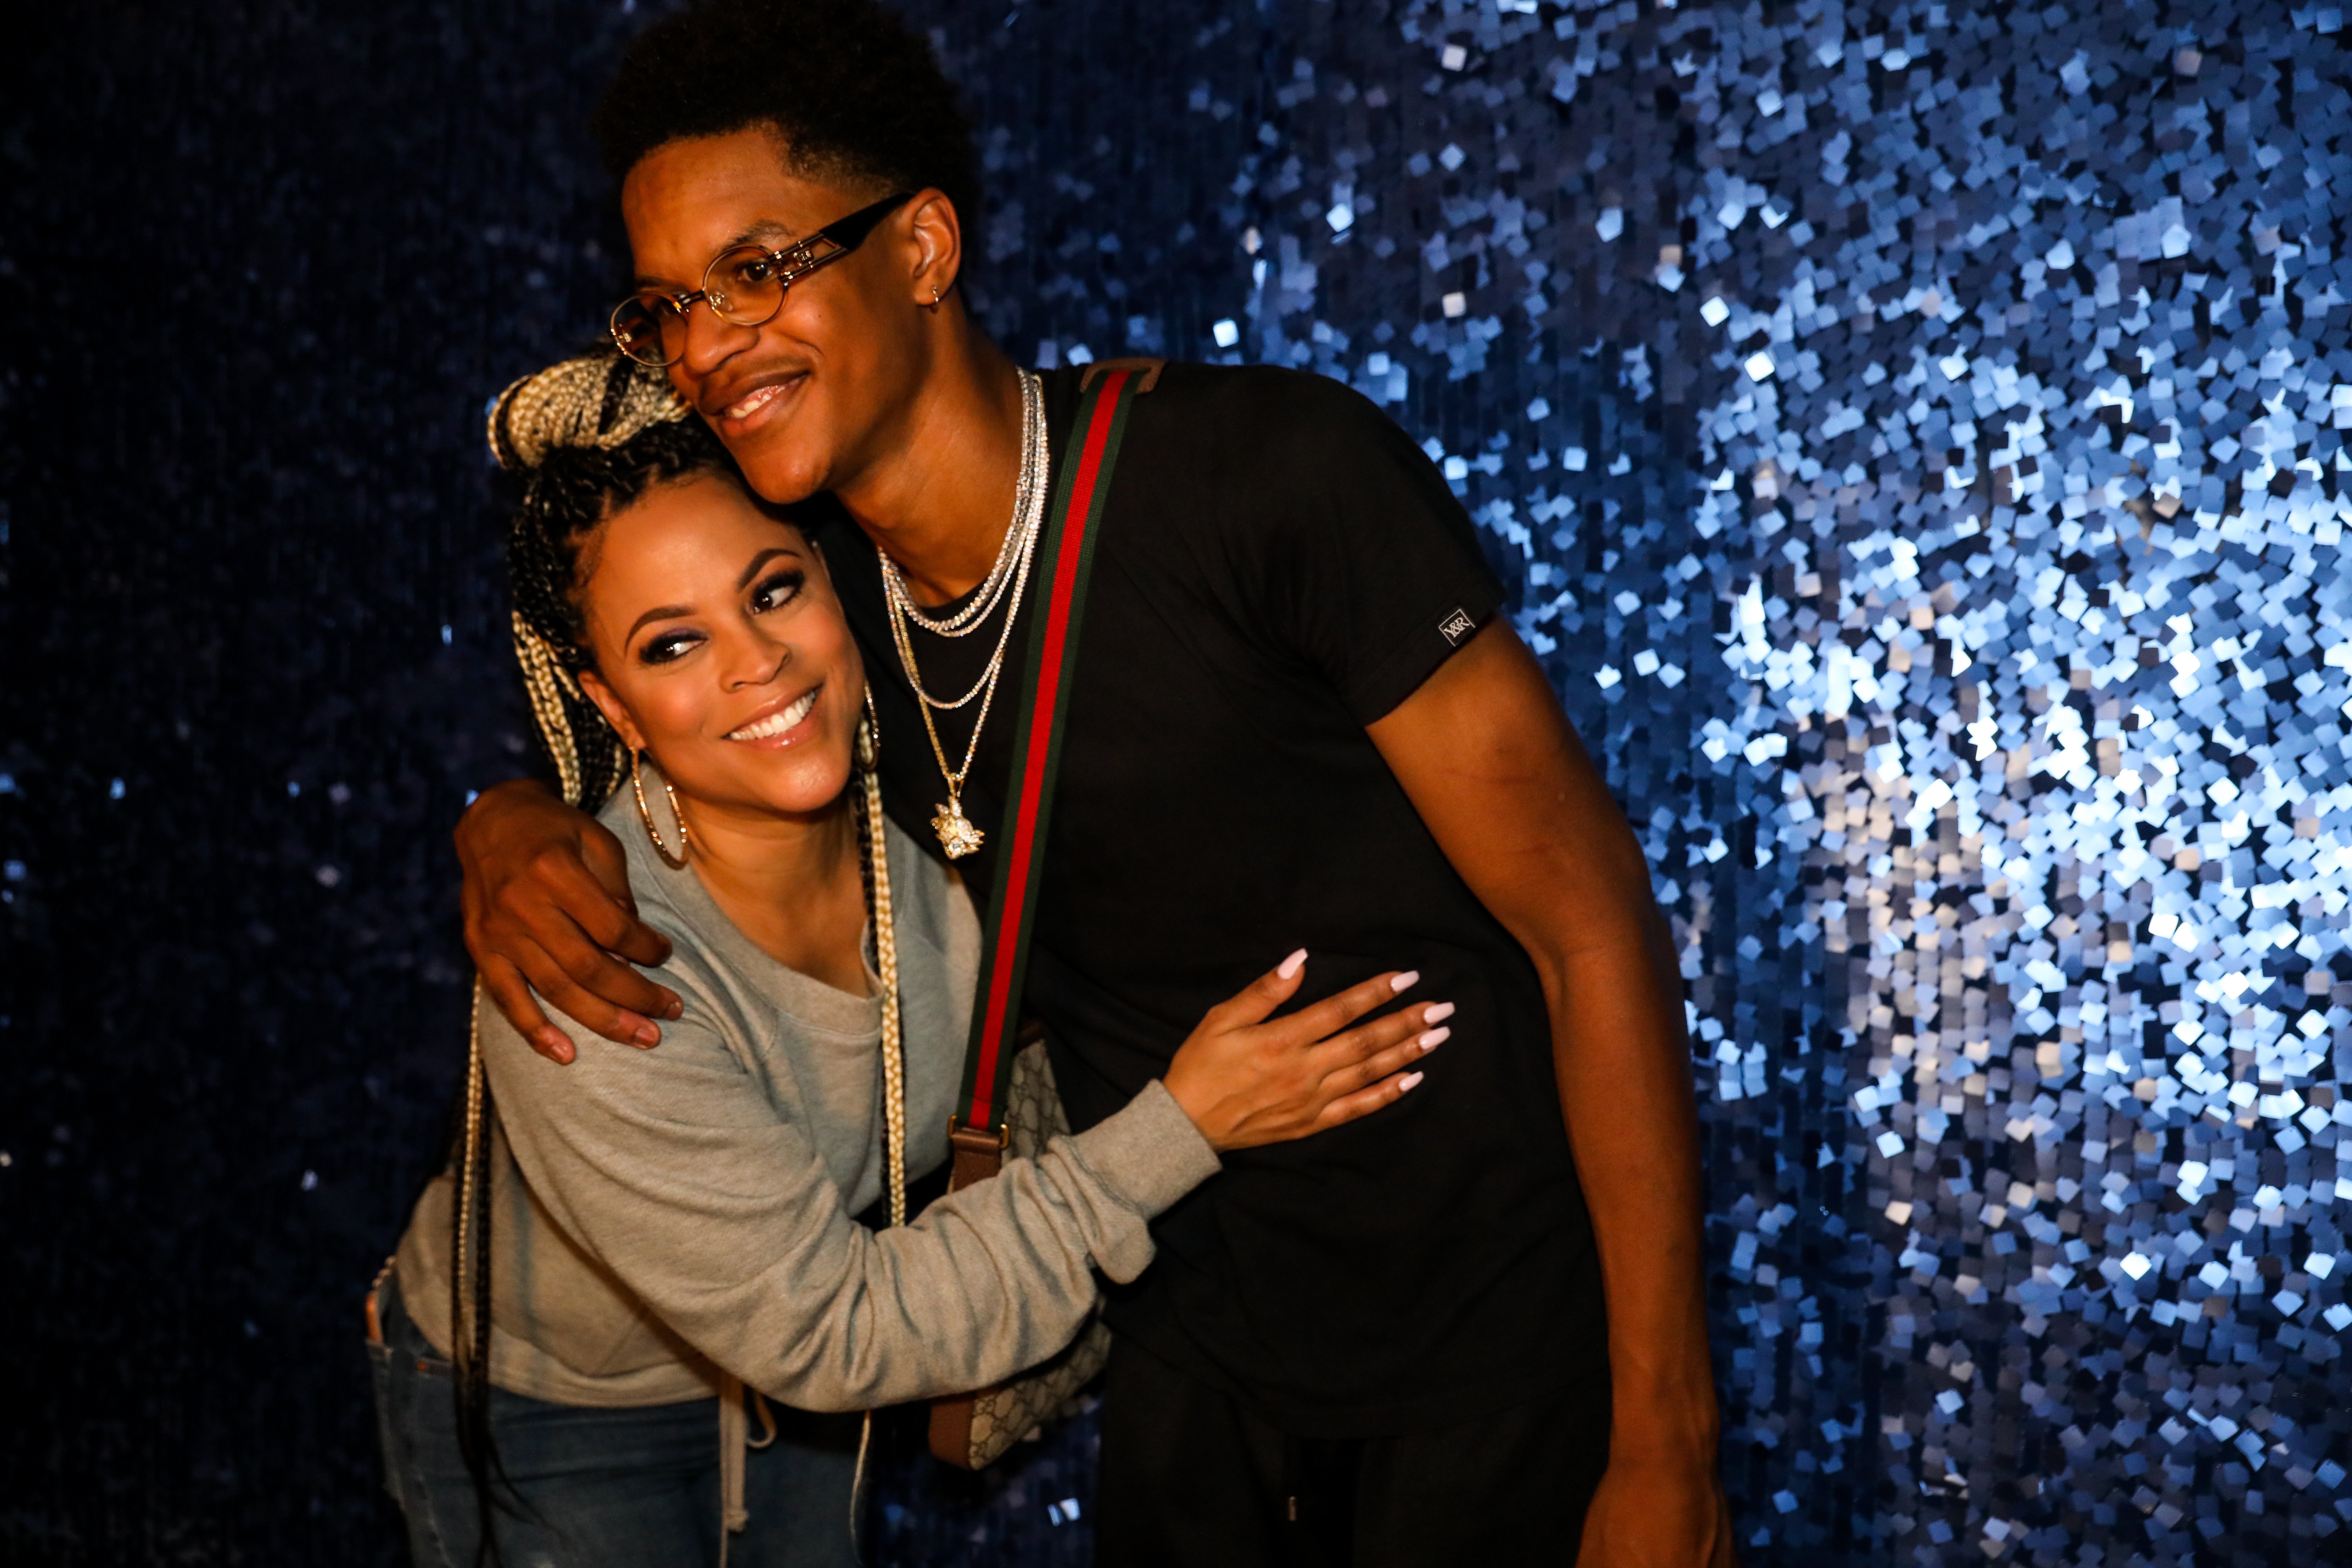 Shaunie O'Neal and Shareef O'Neal at his 18th birthday party, 2018 in California | Source: Getty Images